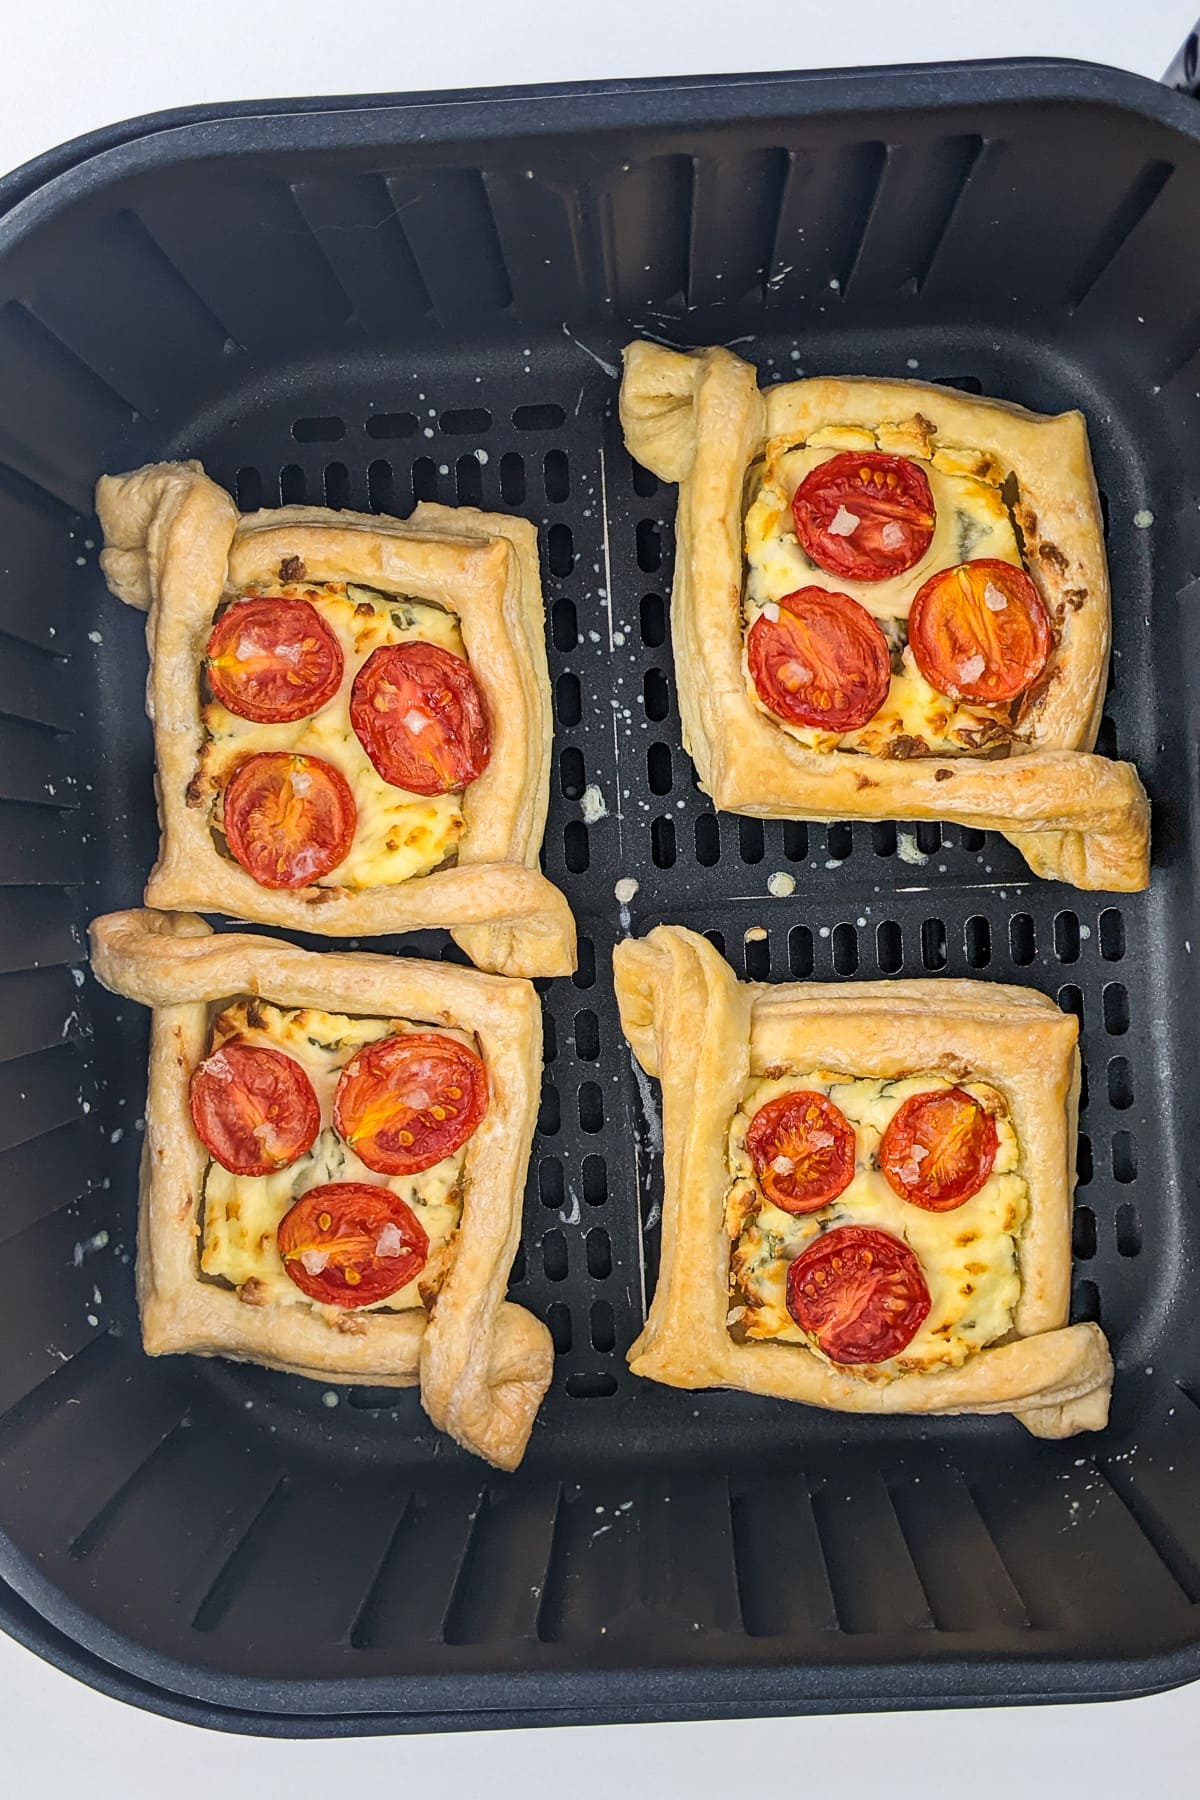 Top view of air fryer basket with 4 baked tomato tartlets.